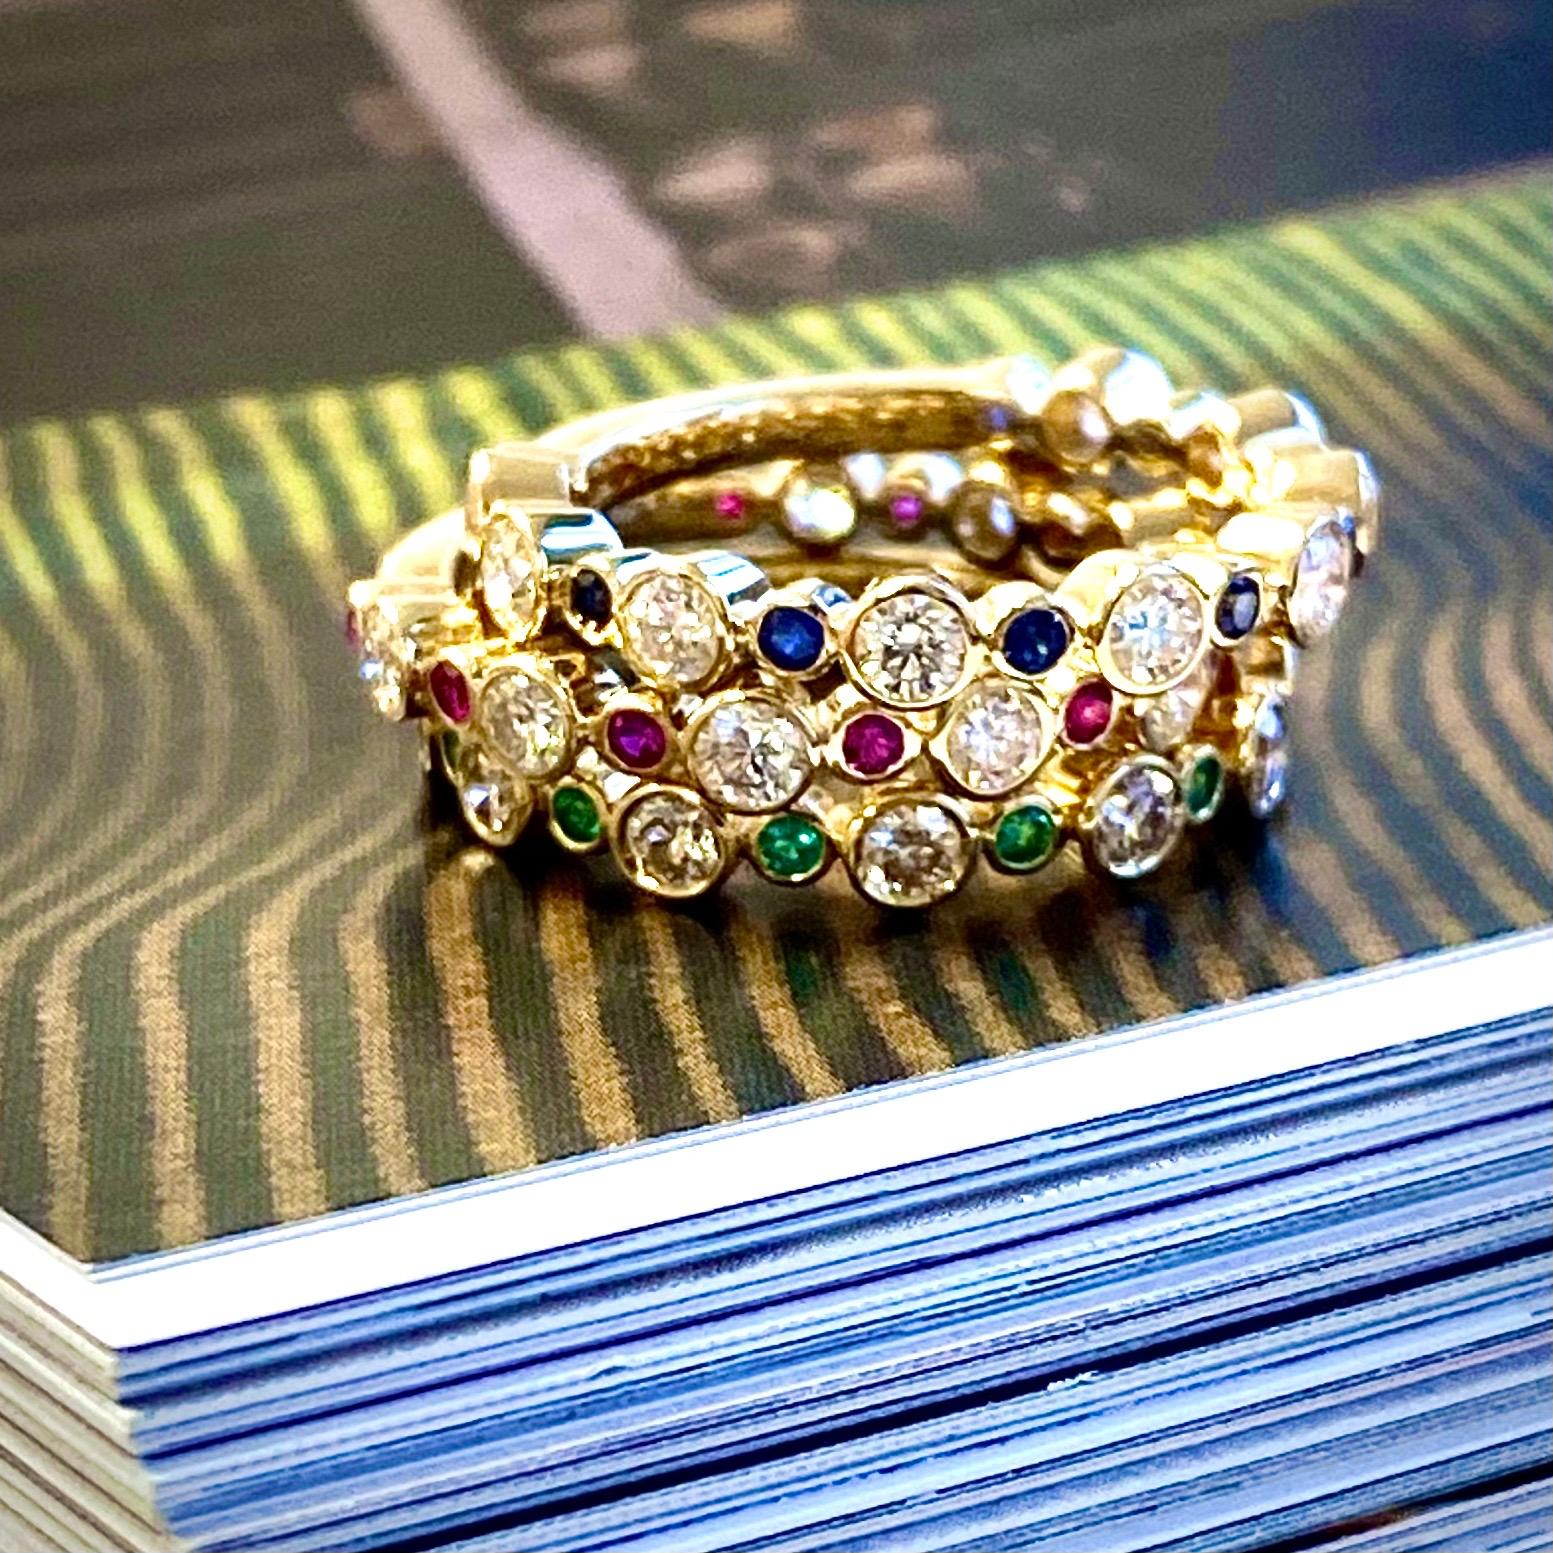 Created in 18 karat yellow gold
Set of three bands
Emerald 0.15 carat approx.
Ruby 0.20 carat approx.
Sapphire 0.20 carat approx.
Diamonds 1.5 carats approx.
Band size US 6.5
Limited edition

Sculpted from 18 karat yellow gold, this limited edition